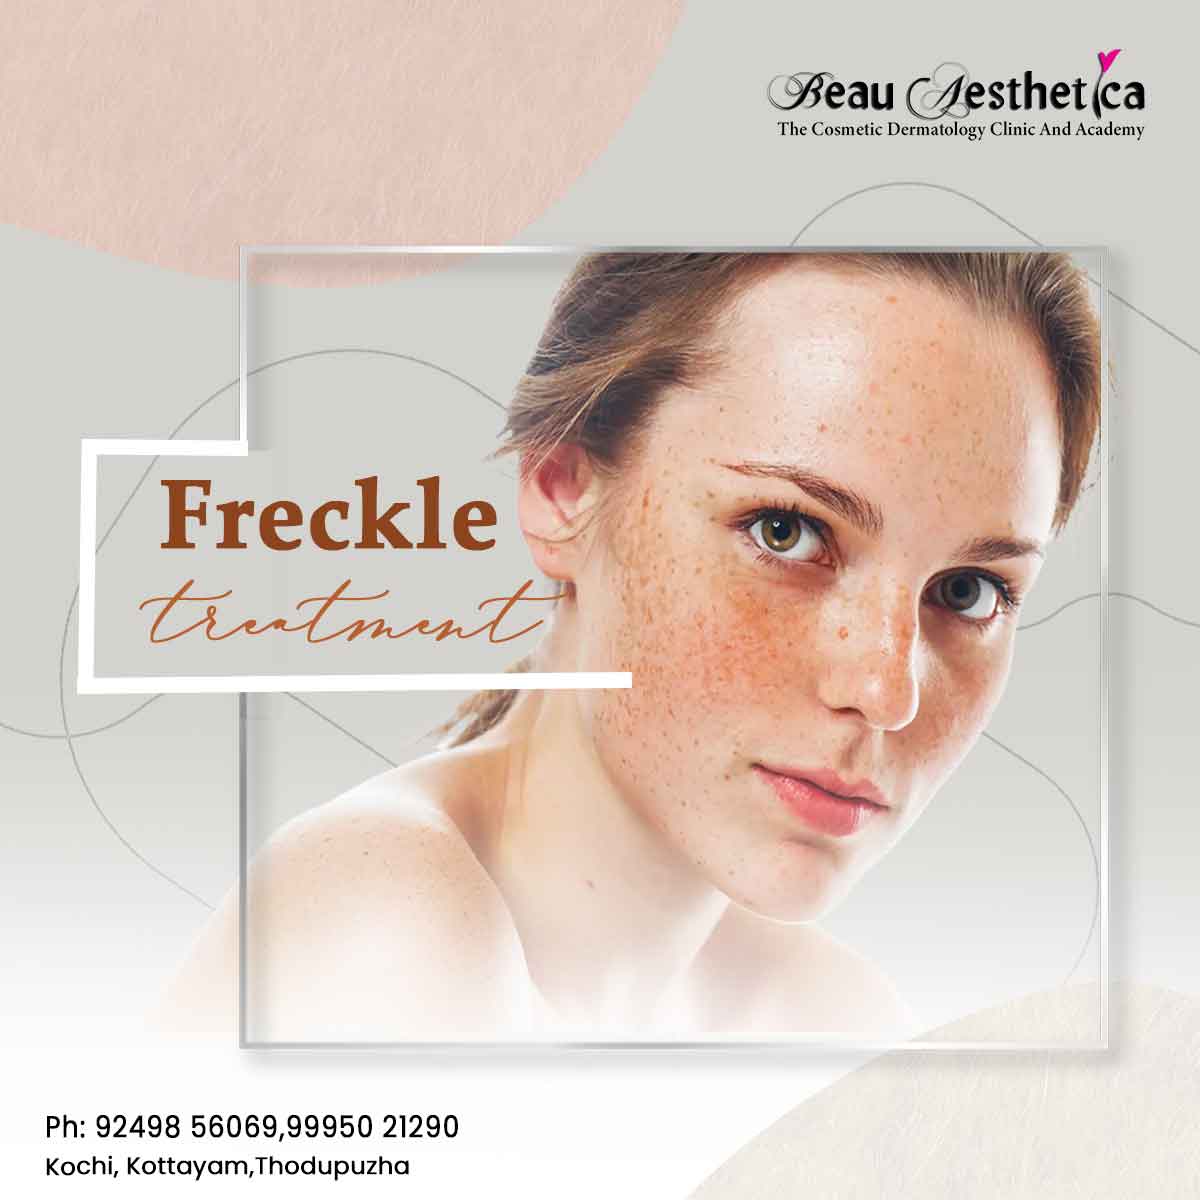 Book your consultation today and take the first step towards freckle-free perfection. ✨ Topical Treatments ✨ Laser Therapy ✨ Chemical Peels For appointment: 92498 56069 / 99950 21290 #FreckleFree #CosmeticTreatments #freckles #freckletreatment #facecaretreatment